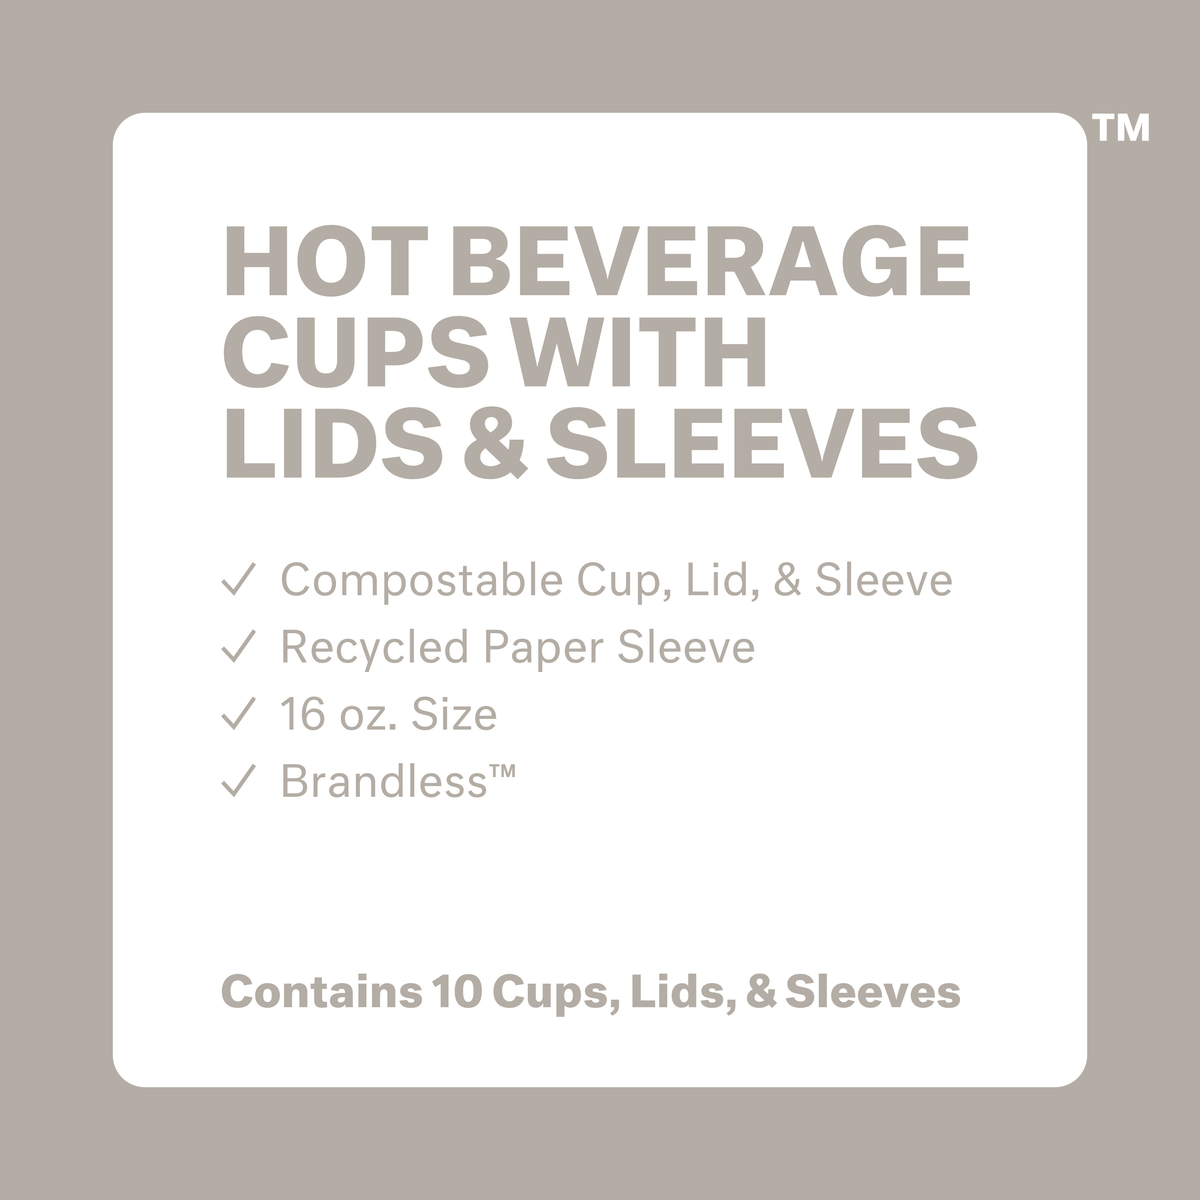 Hot Beverage Cups with Lids and Sleeves. Compostable cup, lid &amp; sleeve. Recycled paper sleeve. 16 oz. size. Brandless. Contains 10 cups, lids, and sleeves.